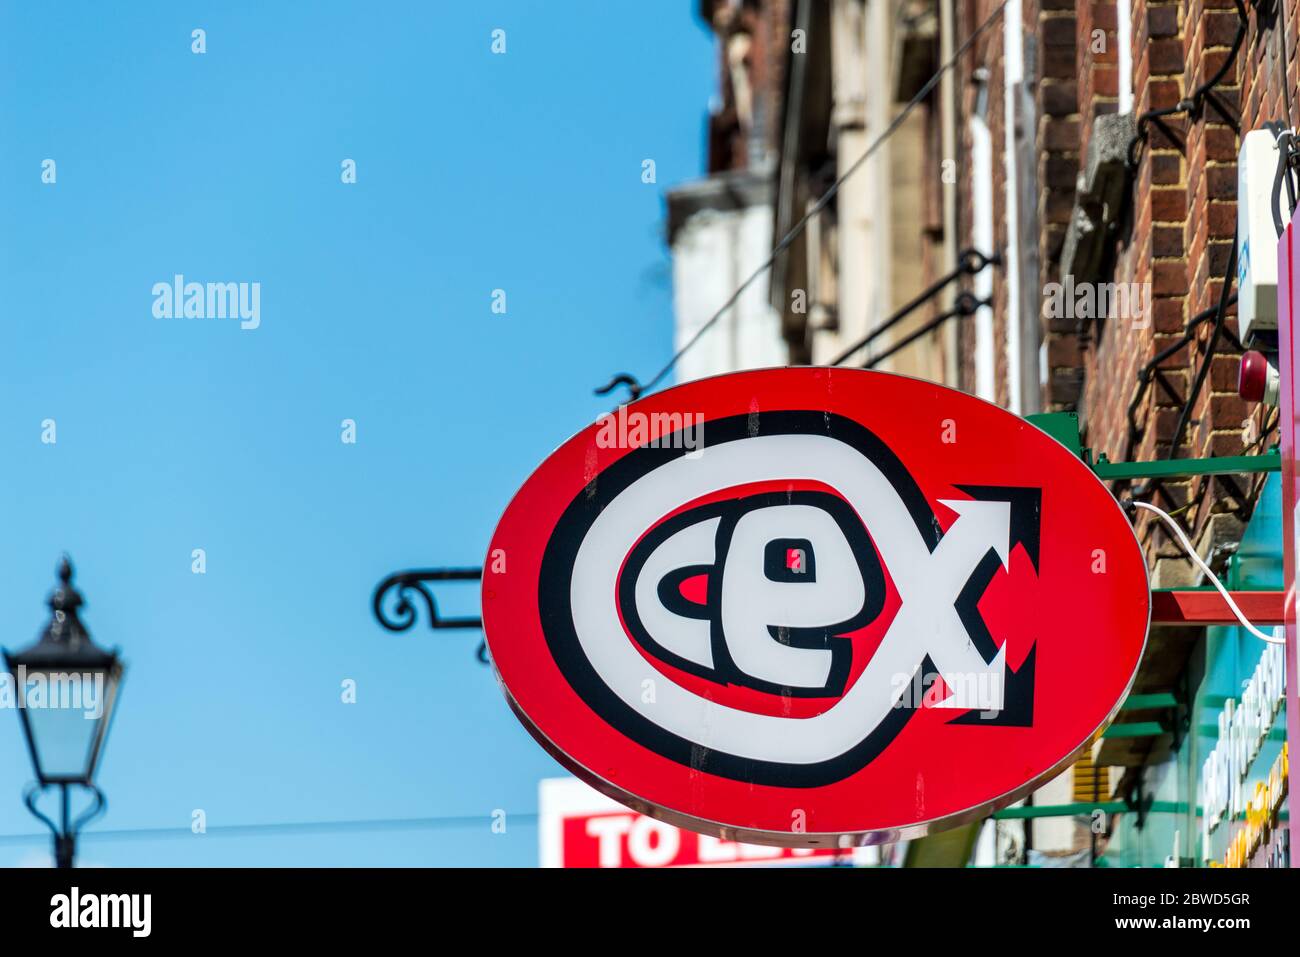 WeBuy Cex shop retail board in high street Stock Photo